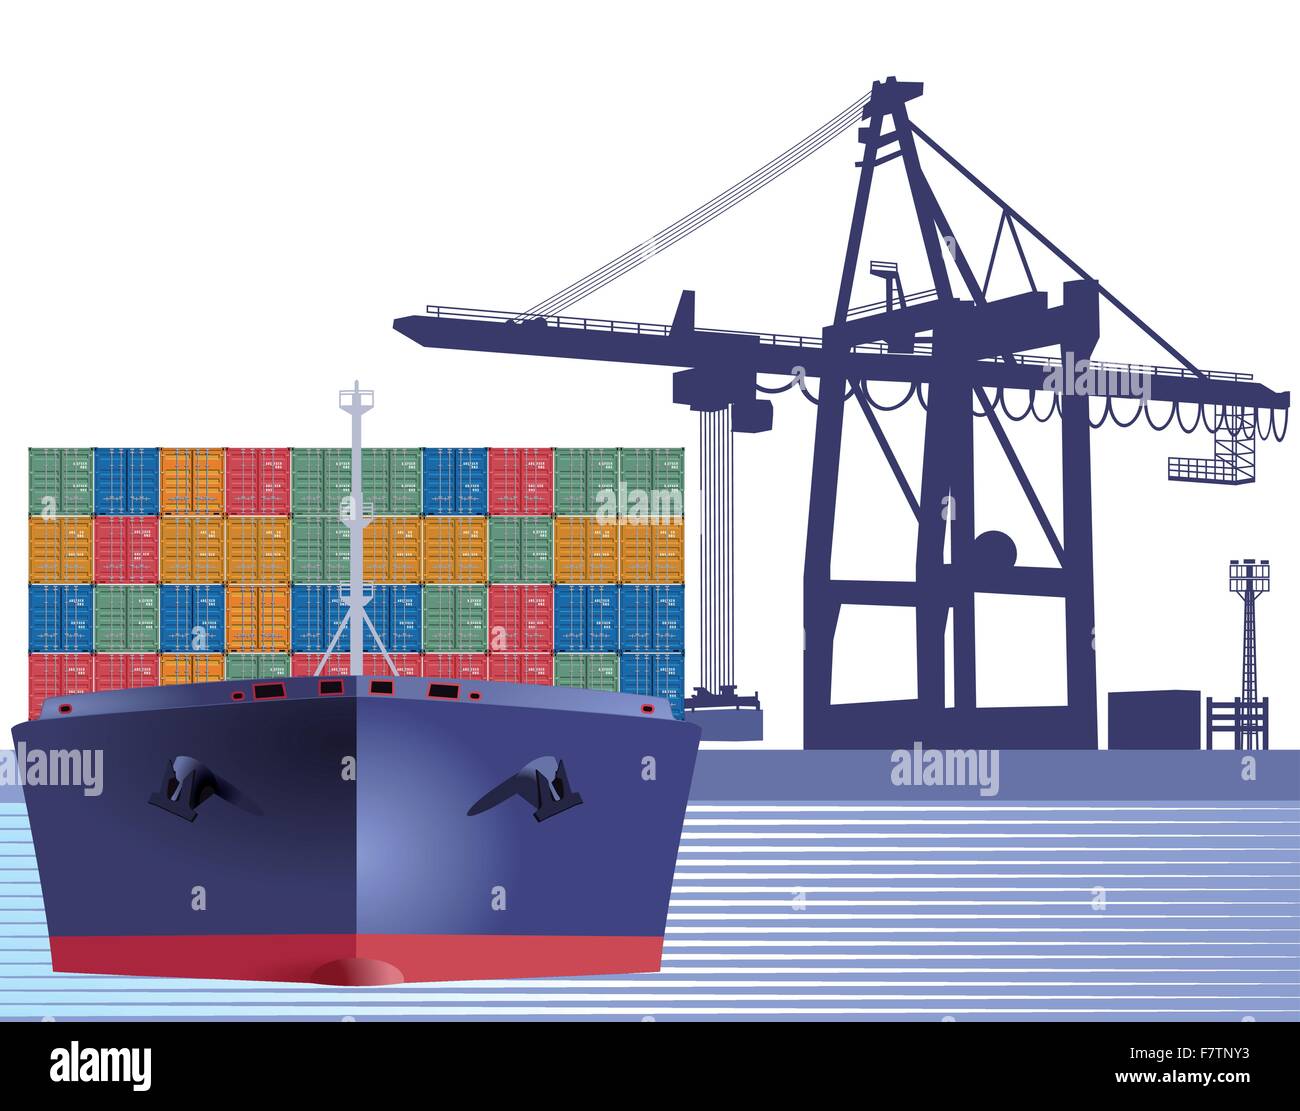 Ship with containers Stock Vector